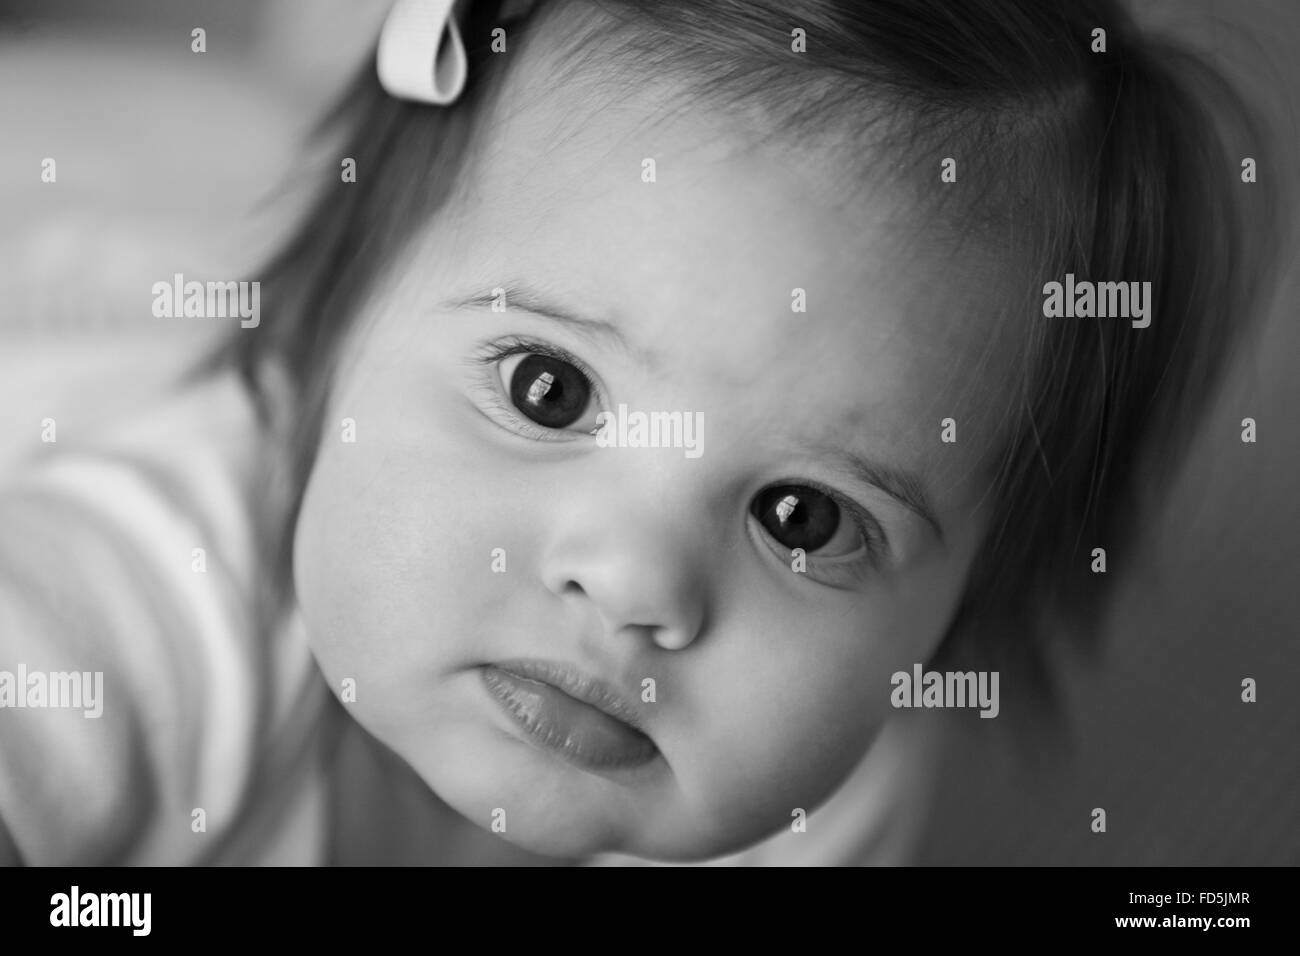 closeup black and white portrait of a sweet baby girl. Stock Photo